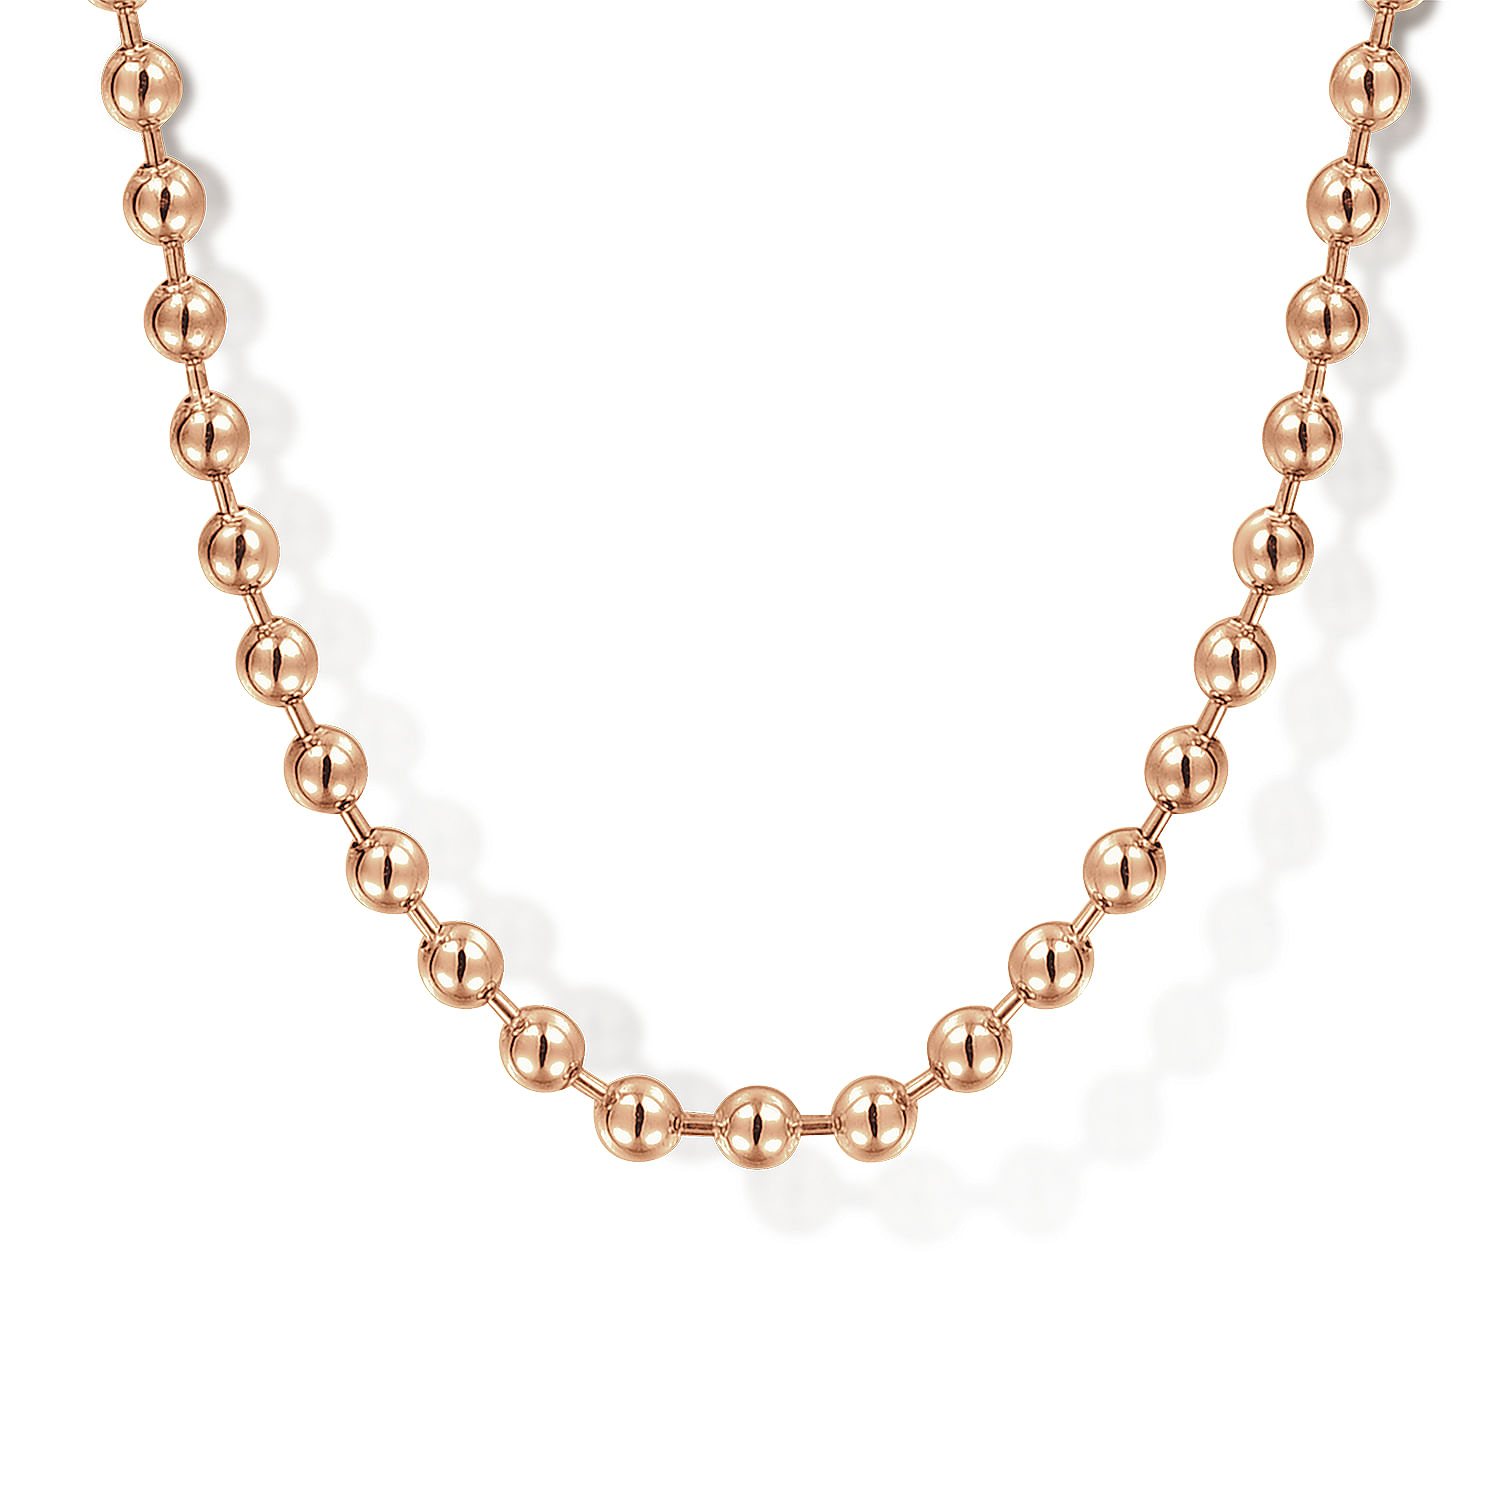 20 Inch 14K Rose Gold 3mm Ball Chain Necklace